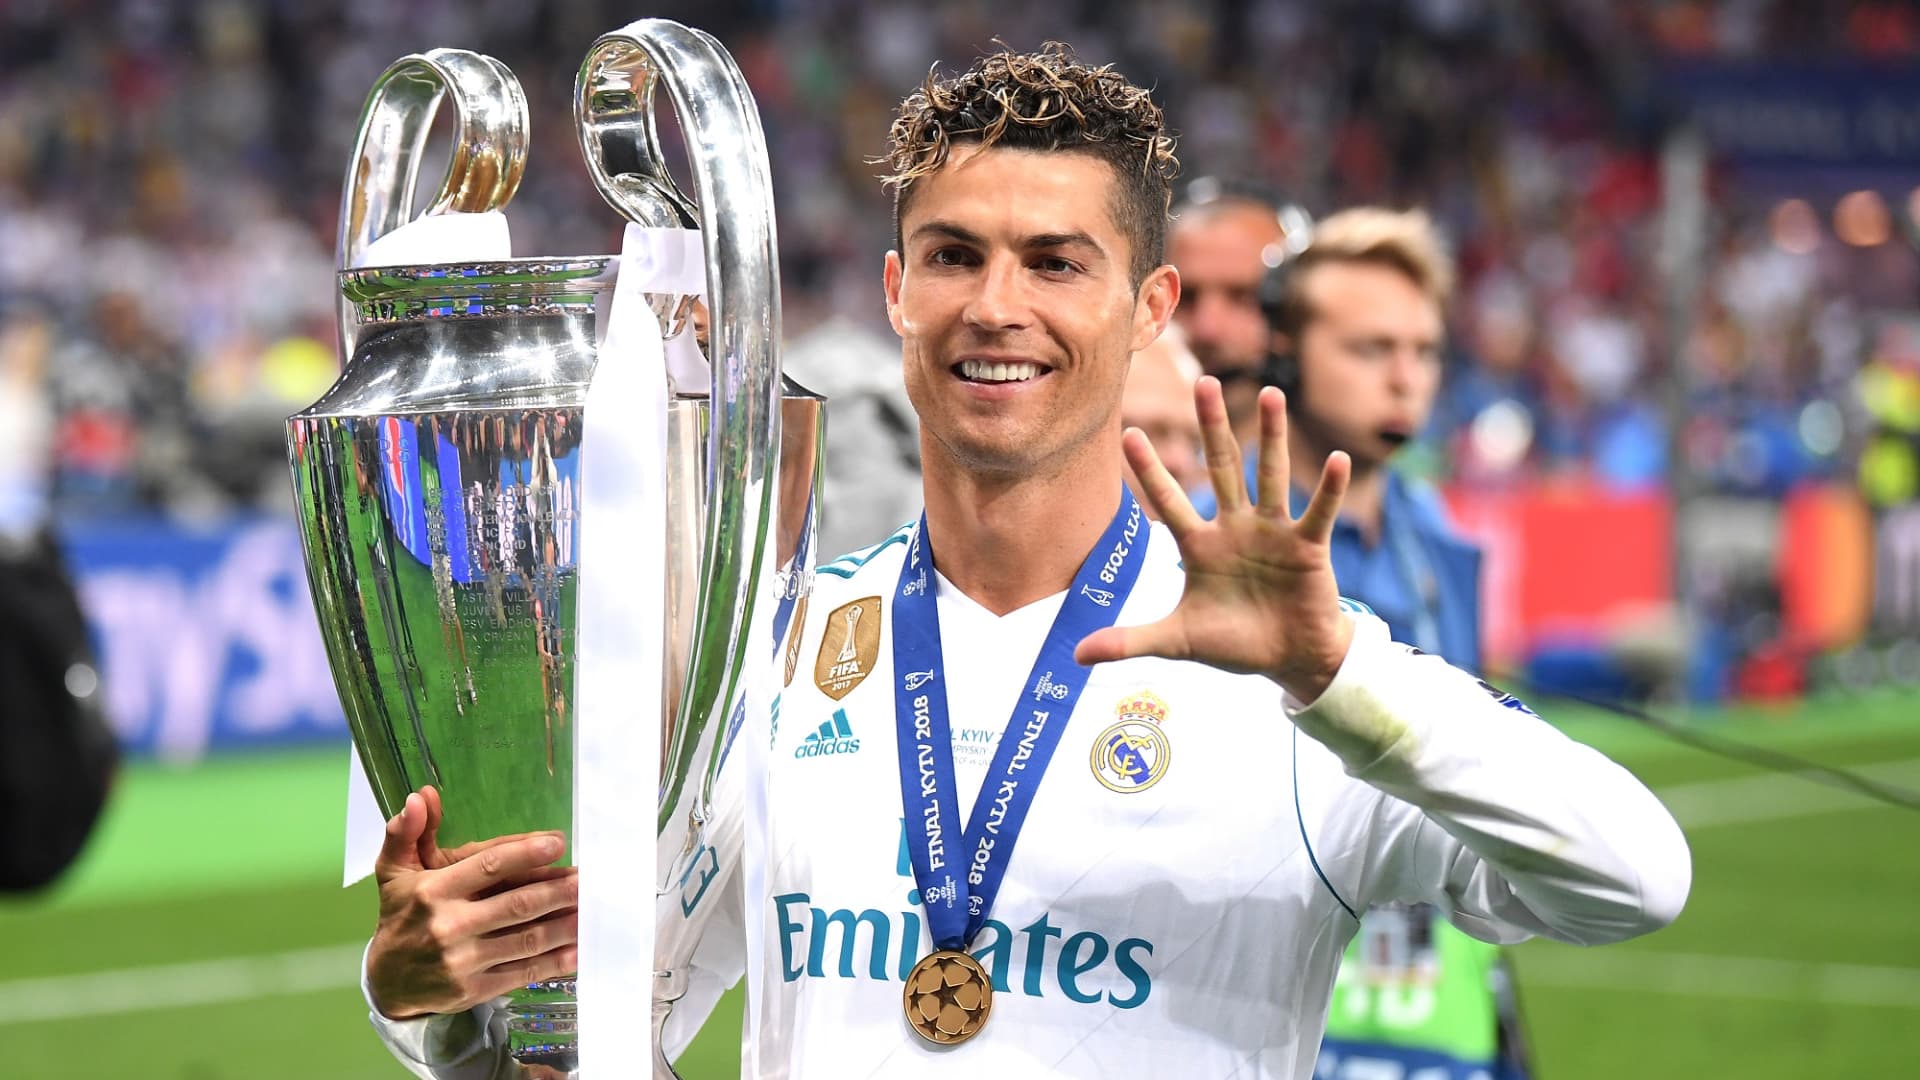 Why did Cristiano Ronaldo sell his Ballon d'Or trophy? - NBC Sports